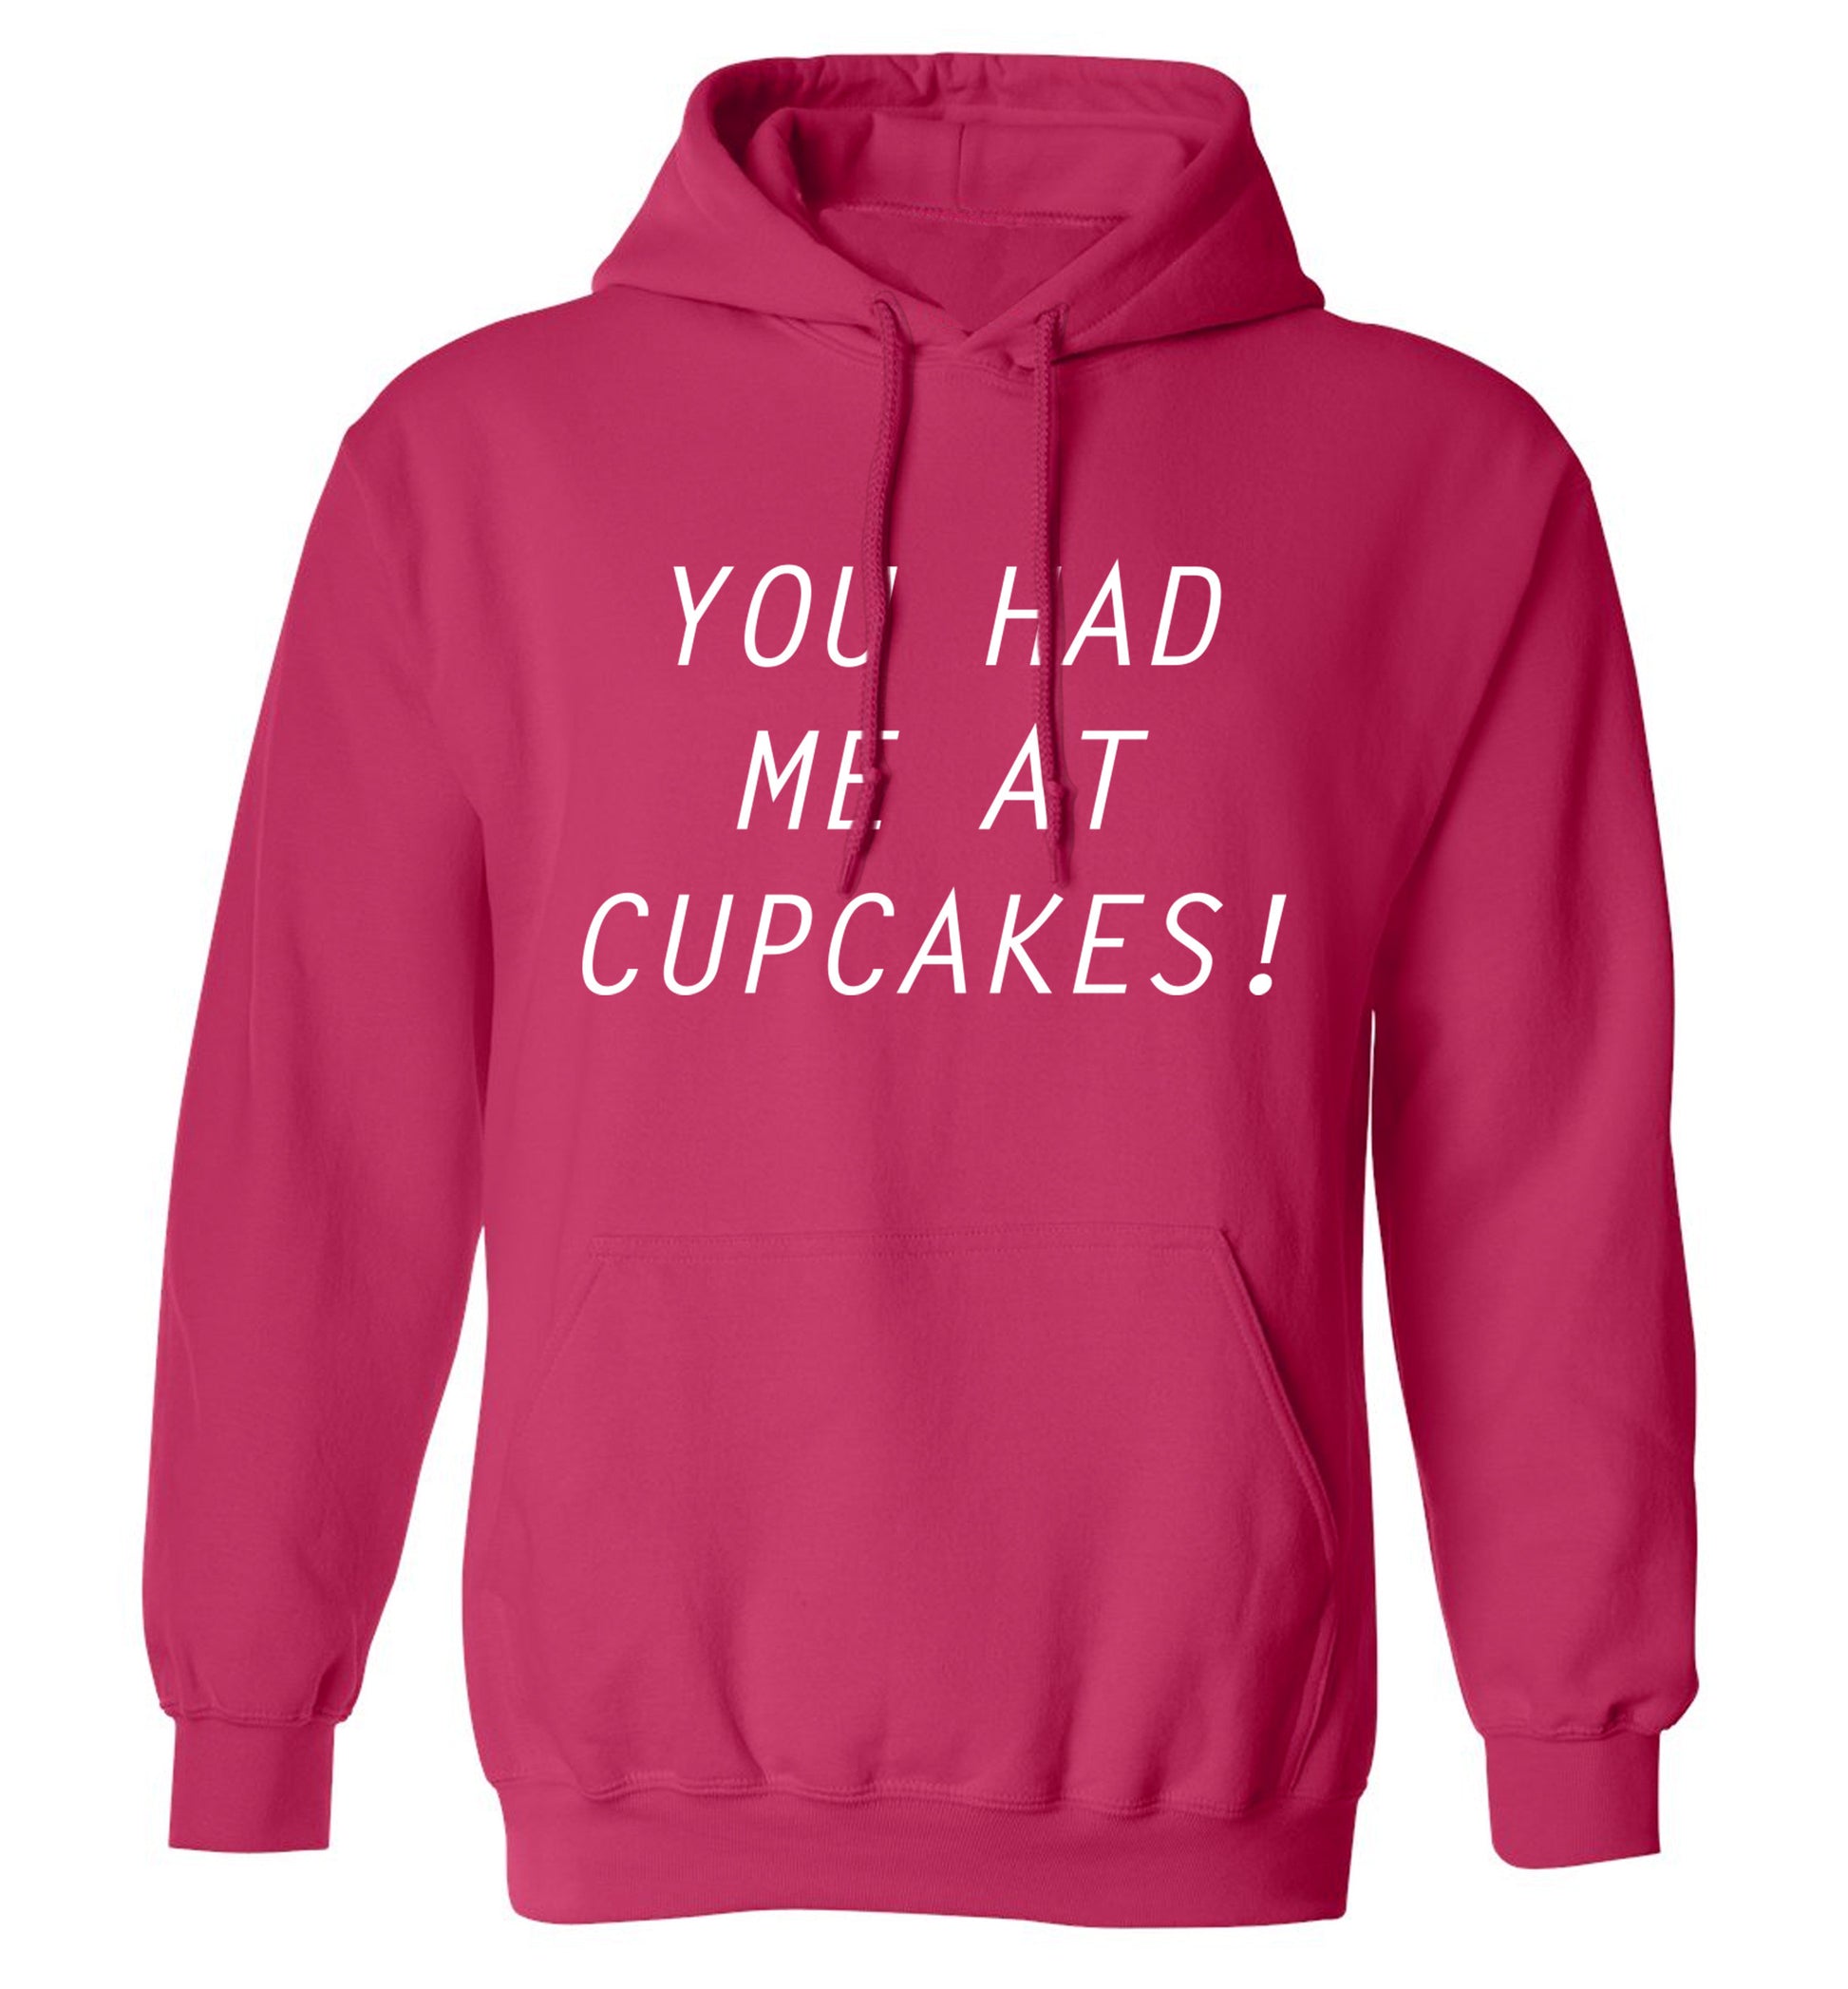 You had me at cupcakes adults unisex pink hoodie 2XL